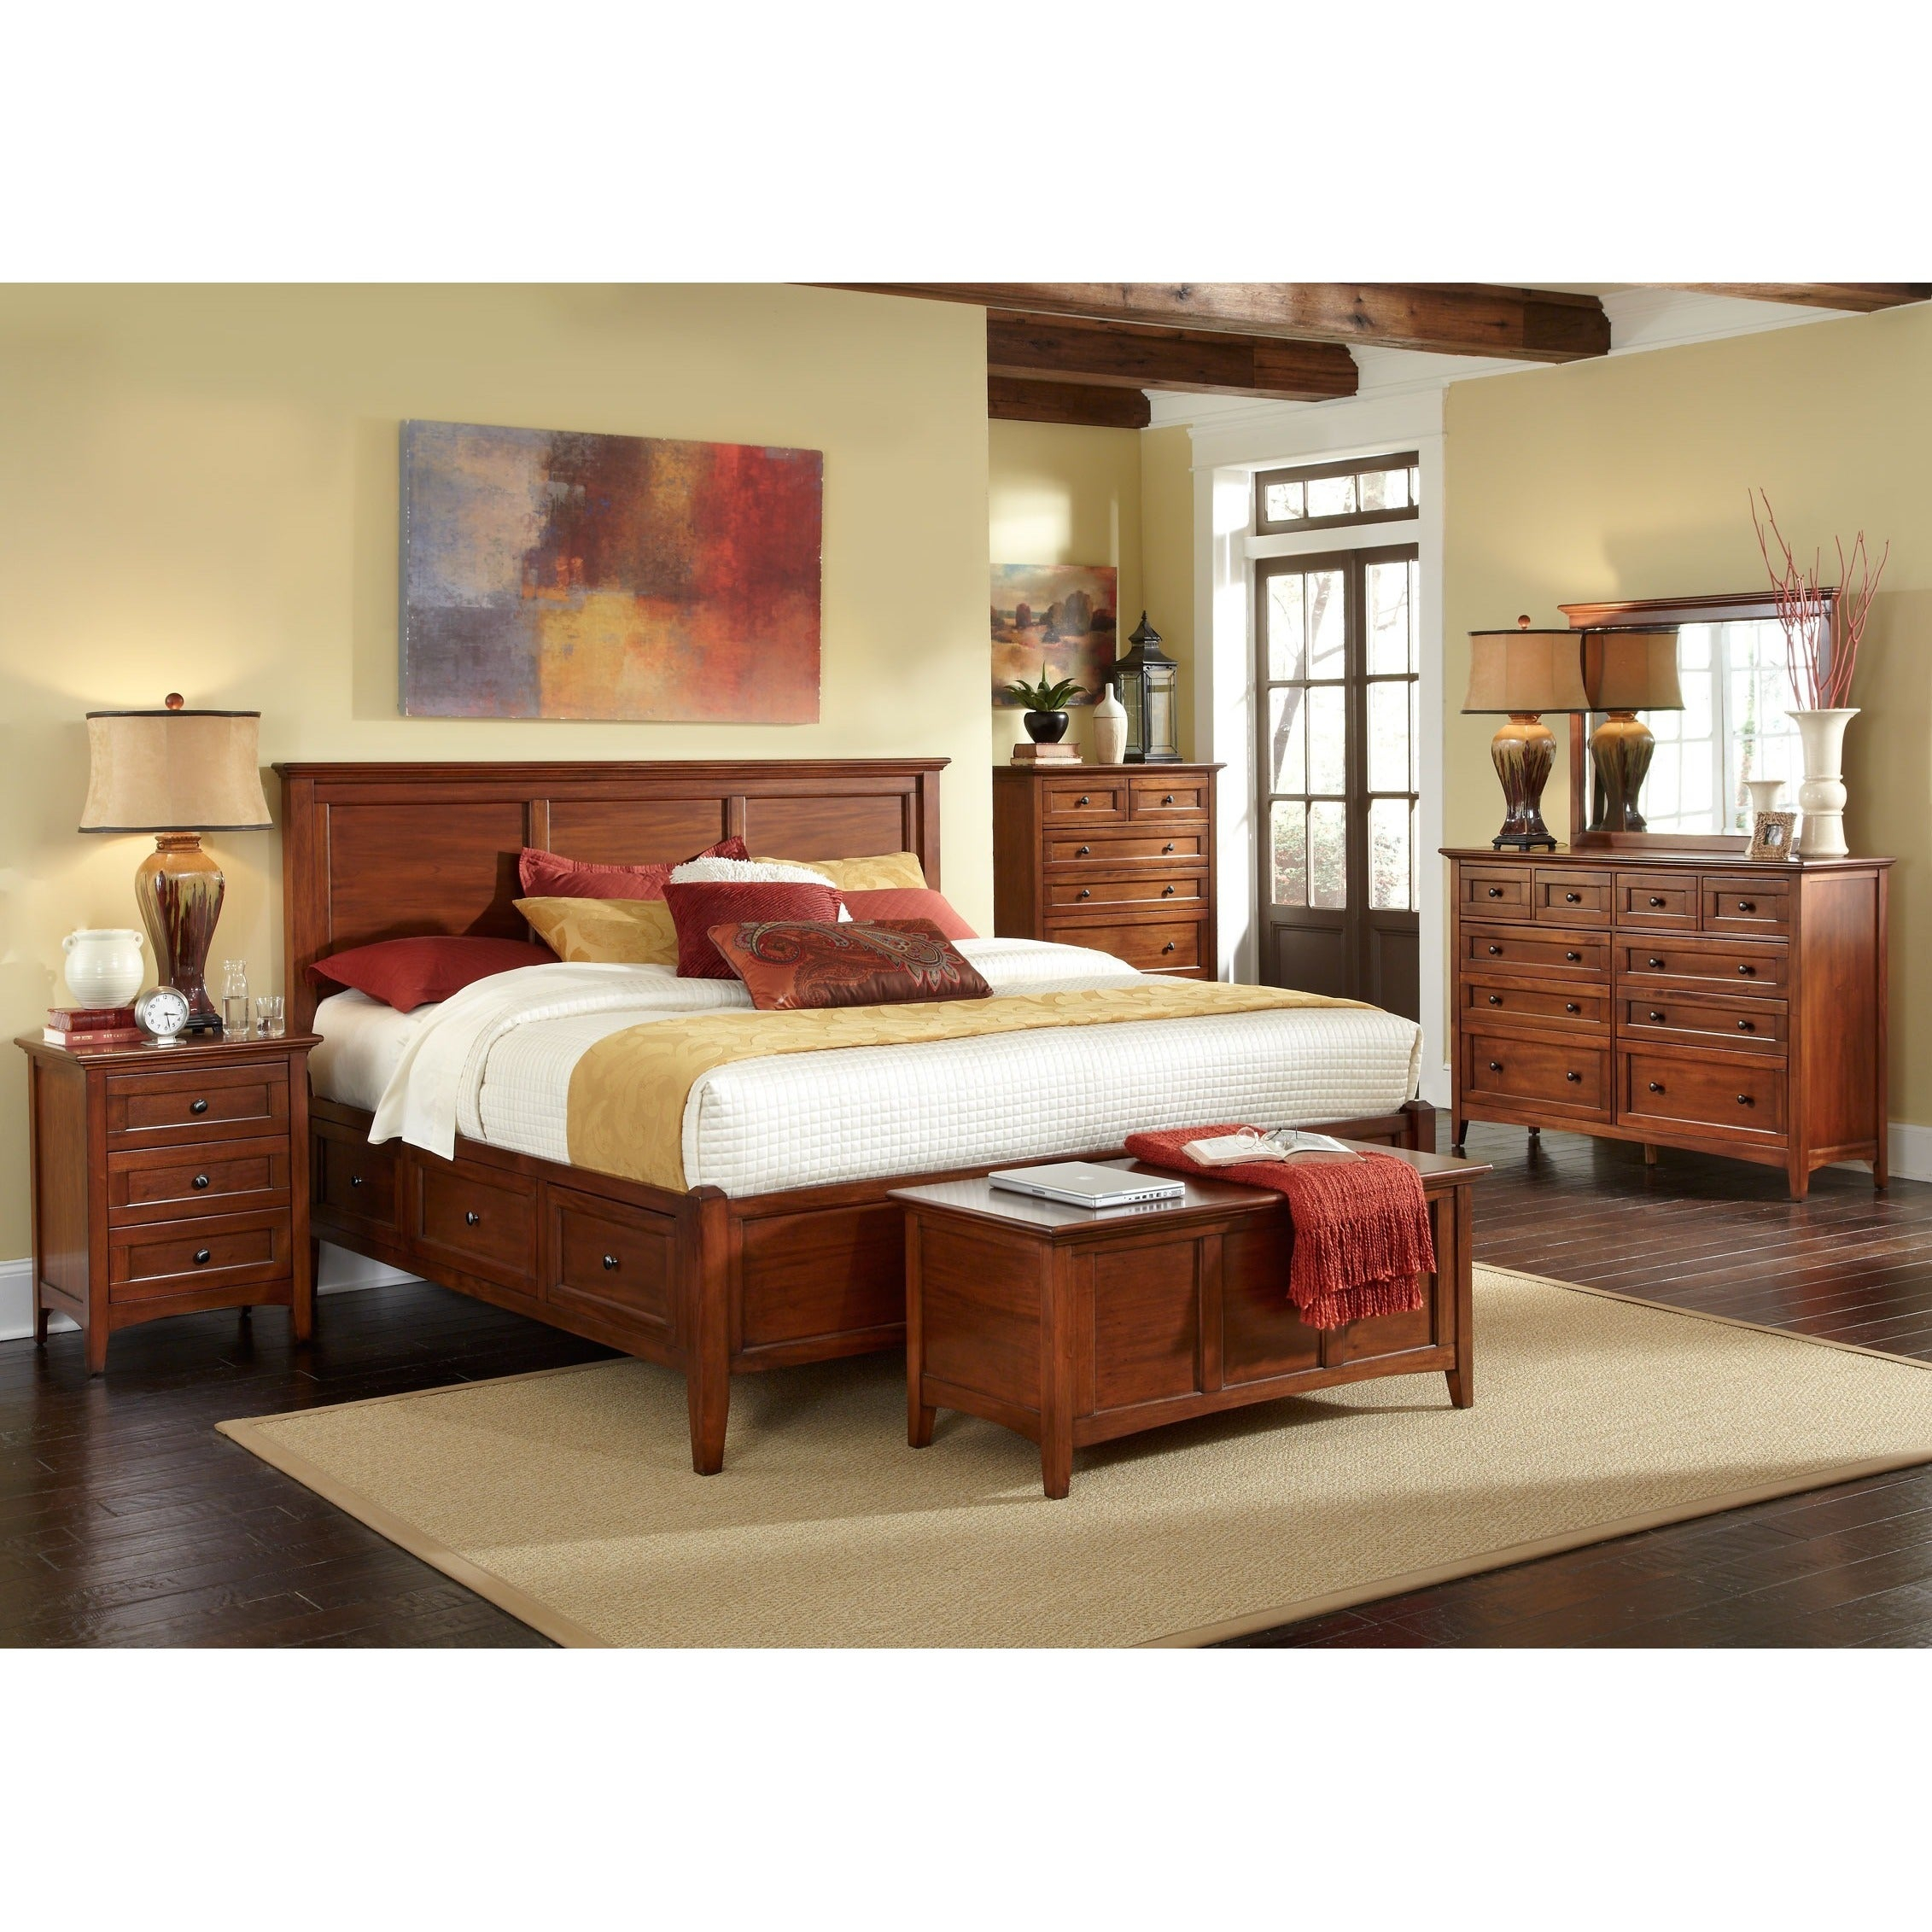 Simply Solid Aiden Solid Wood 7 Piece King Bedroom Collection with regard to sizing 2263 X 2263